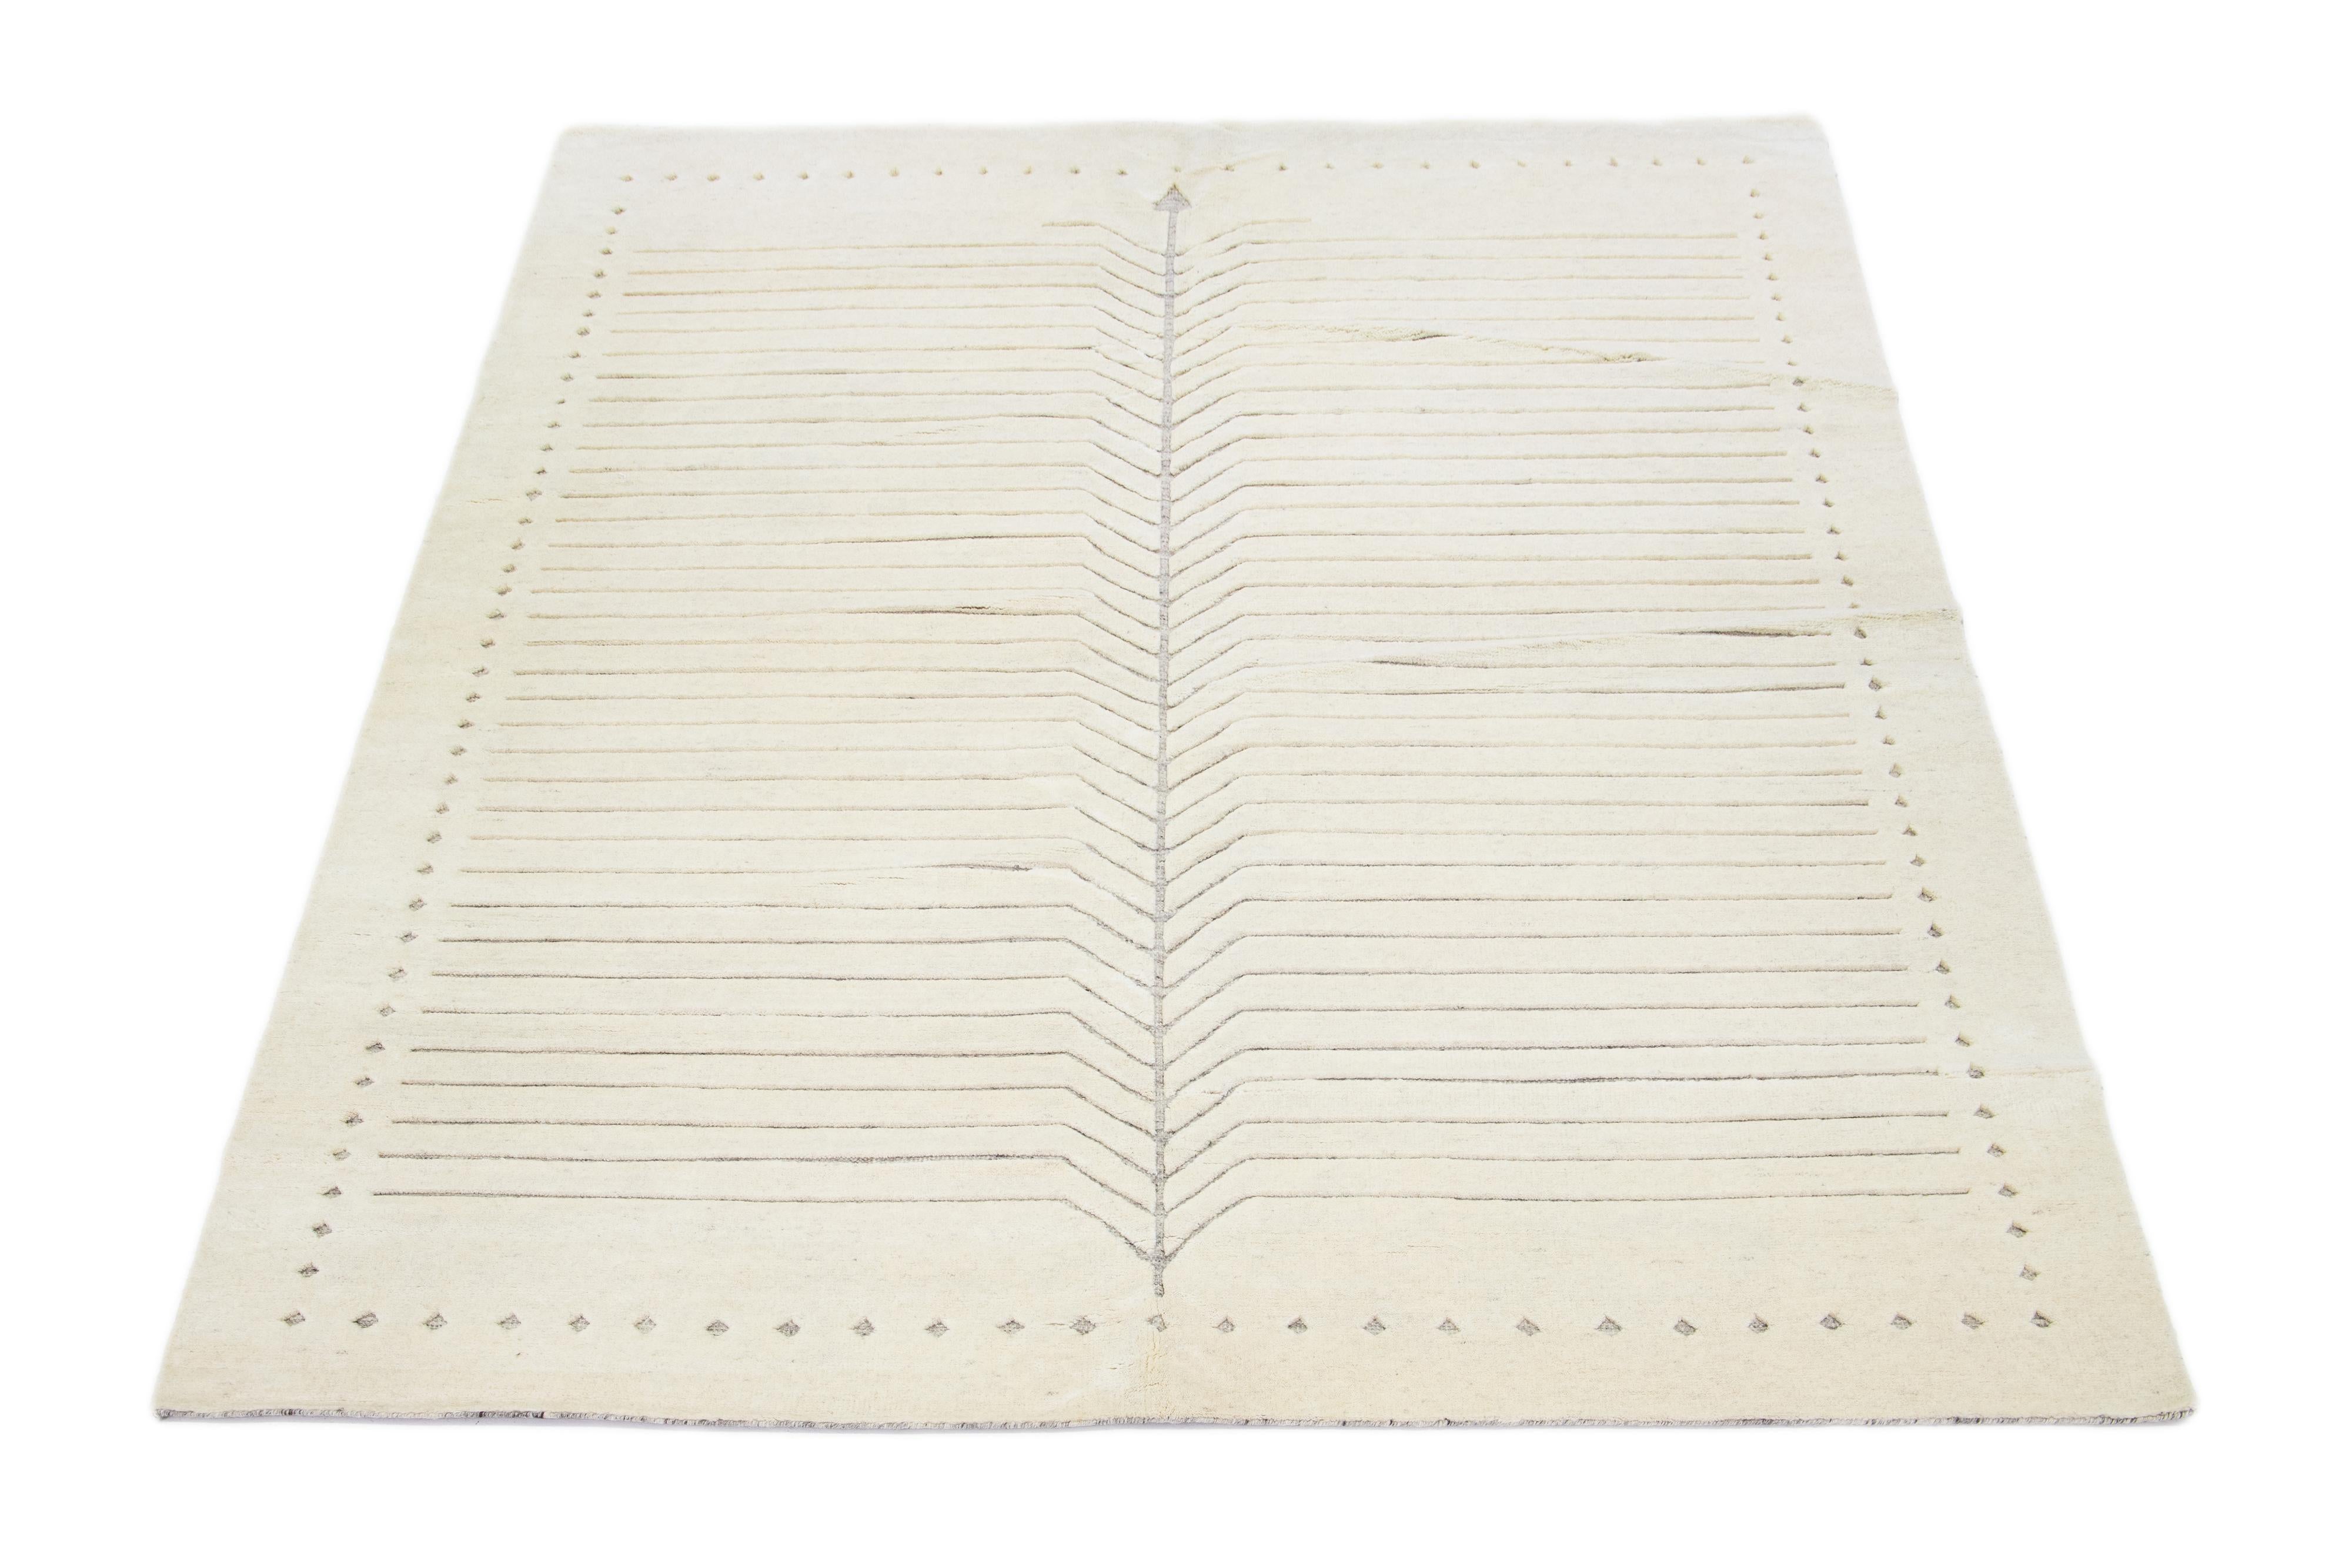 Exquisitely crafted by hand, this modern Moroccan rug features a luxuriously minimalist gray design in the most elegant ivories.

This rug measures 9' x 12'.